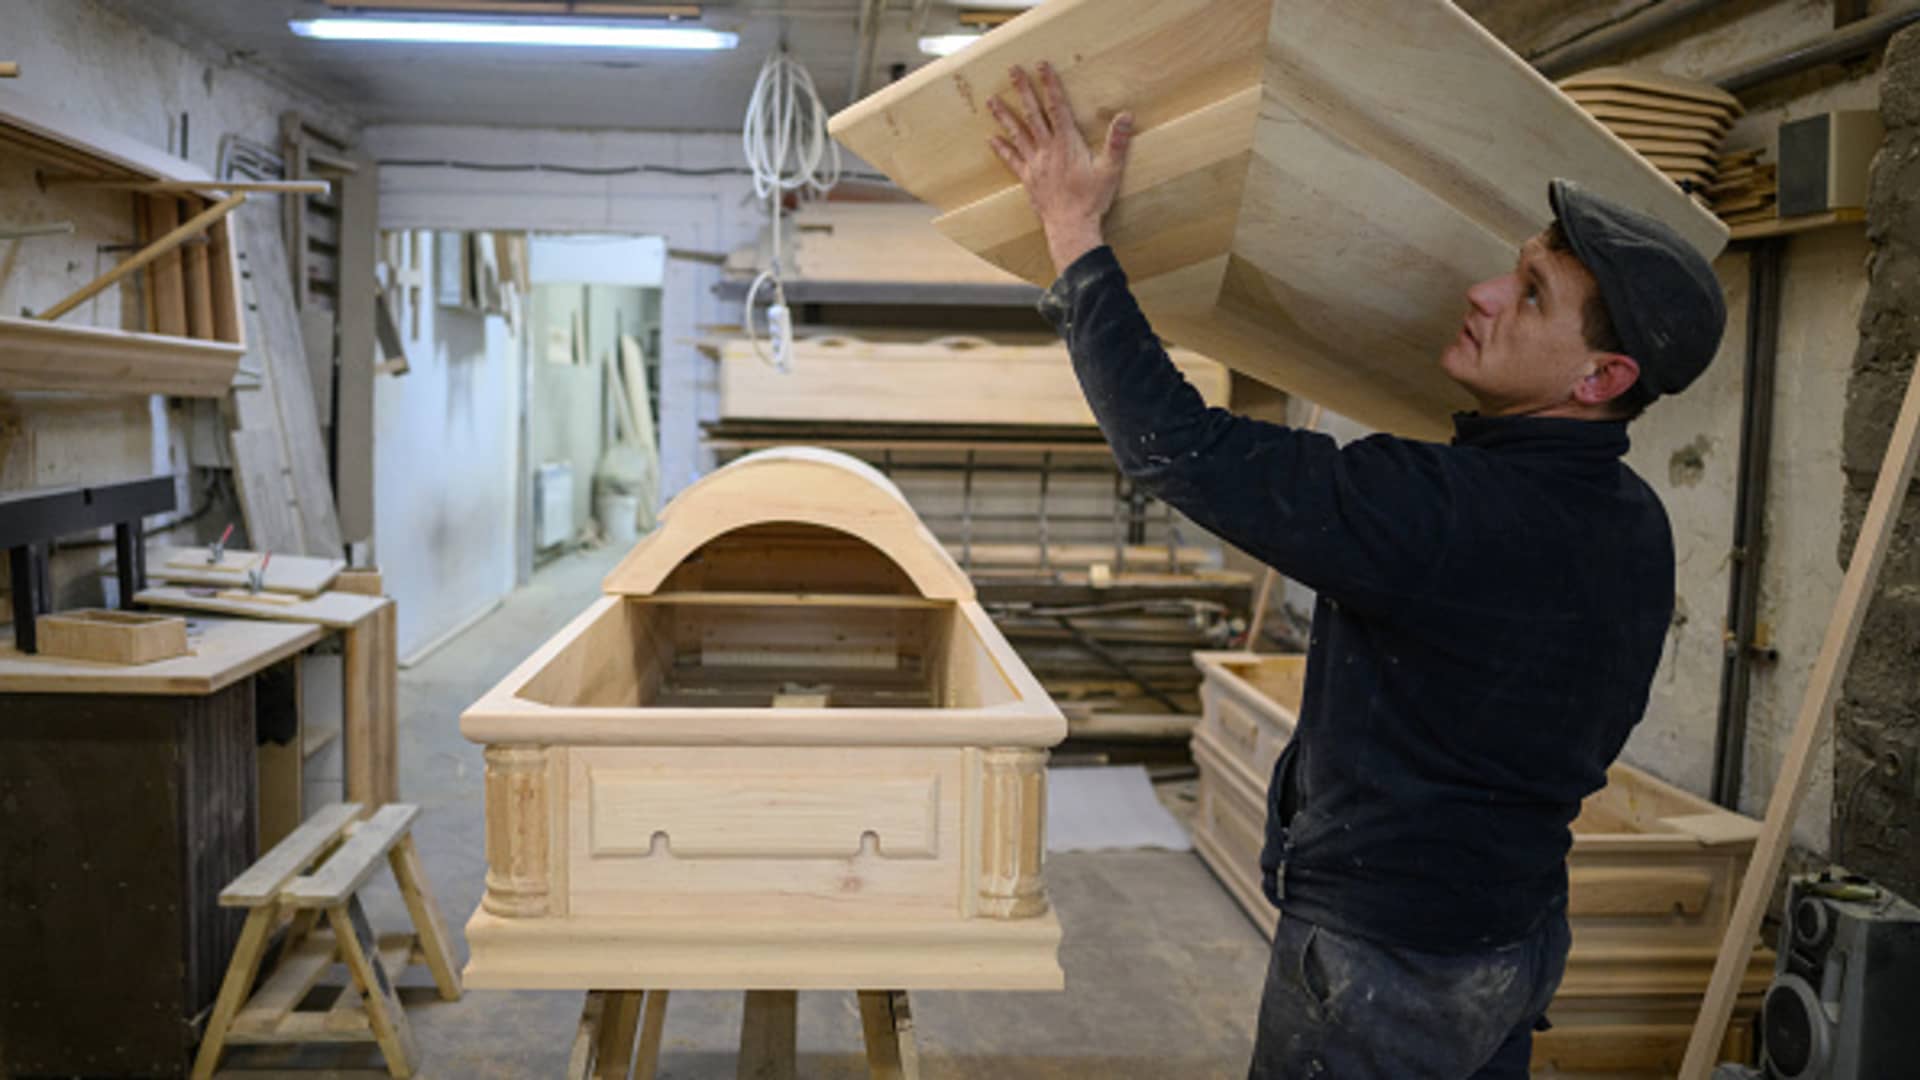 Craftsman Ruslan Slyusar attaches hingers to the lid of a coffin at a coffin workshop on April 28, 2022 in Rava-Ruska, Ukraine.